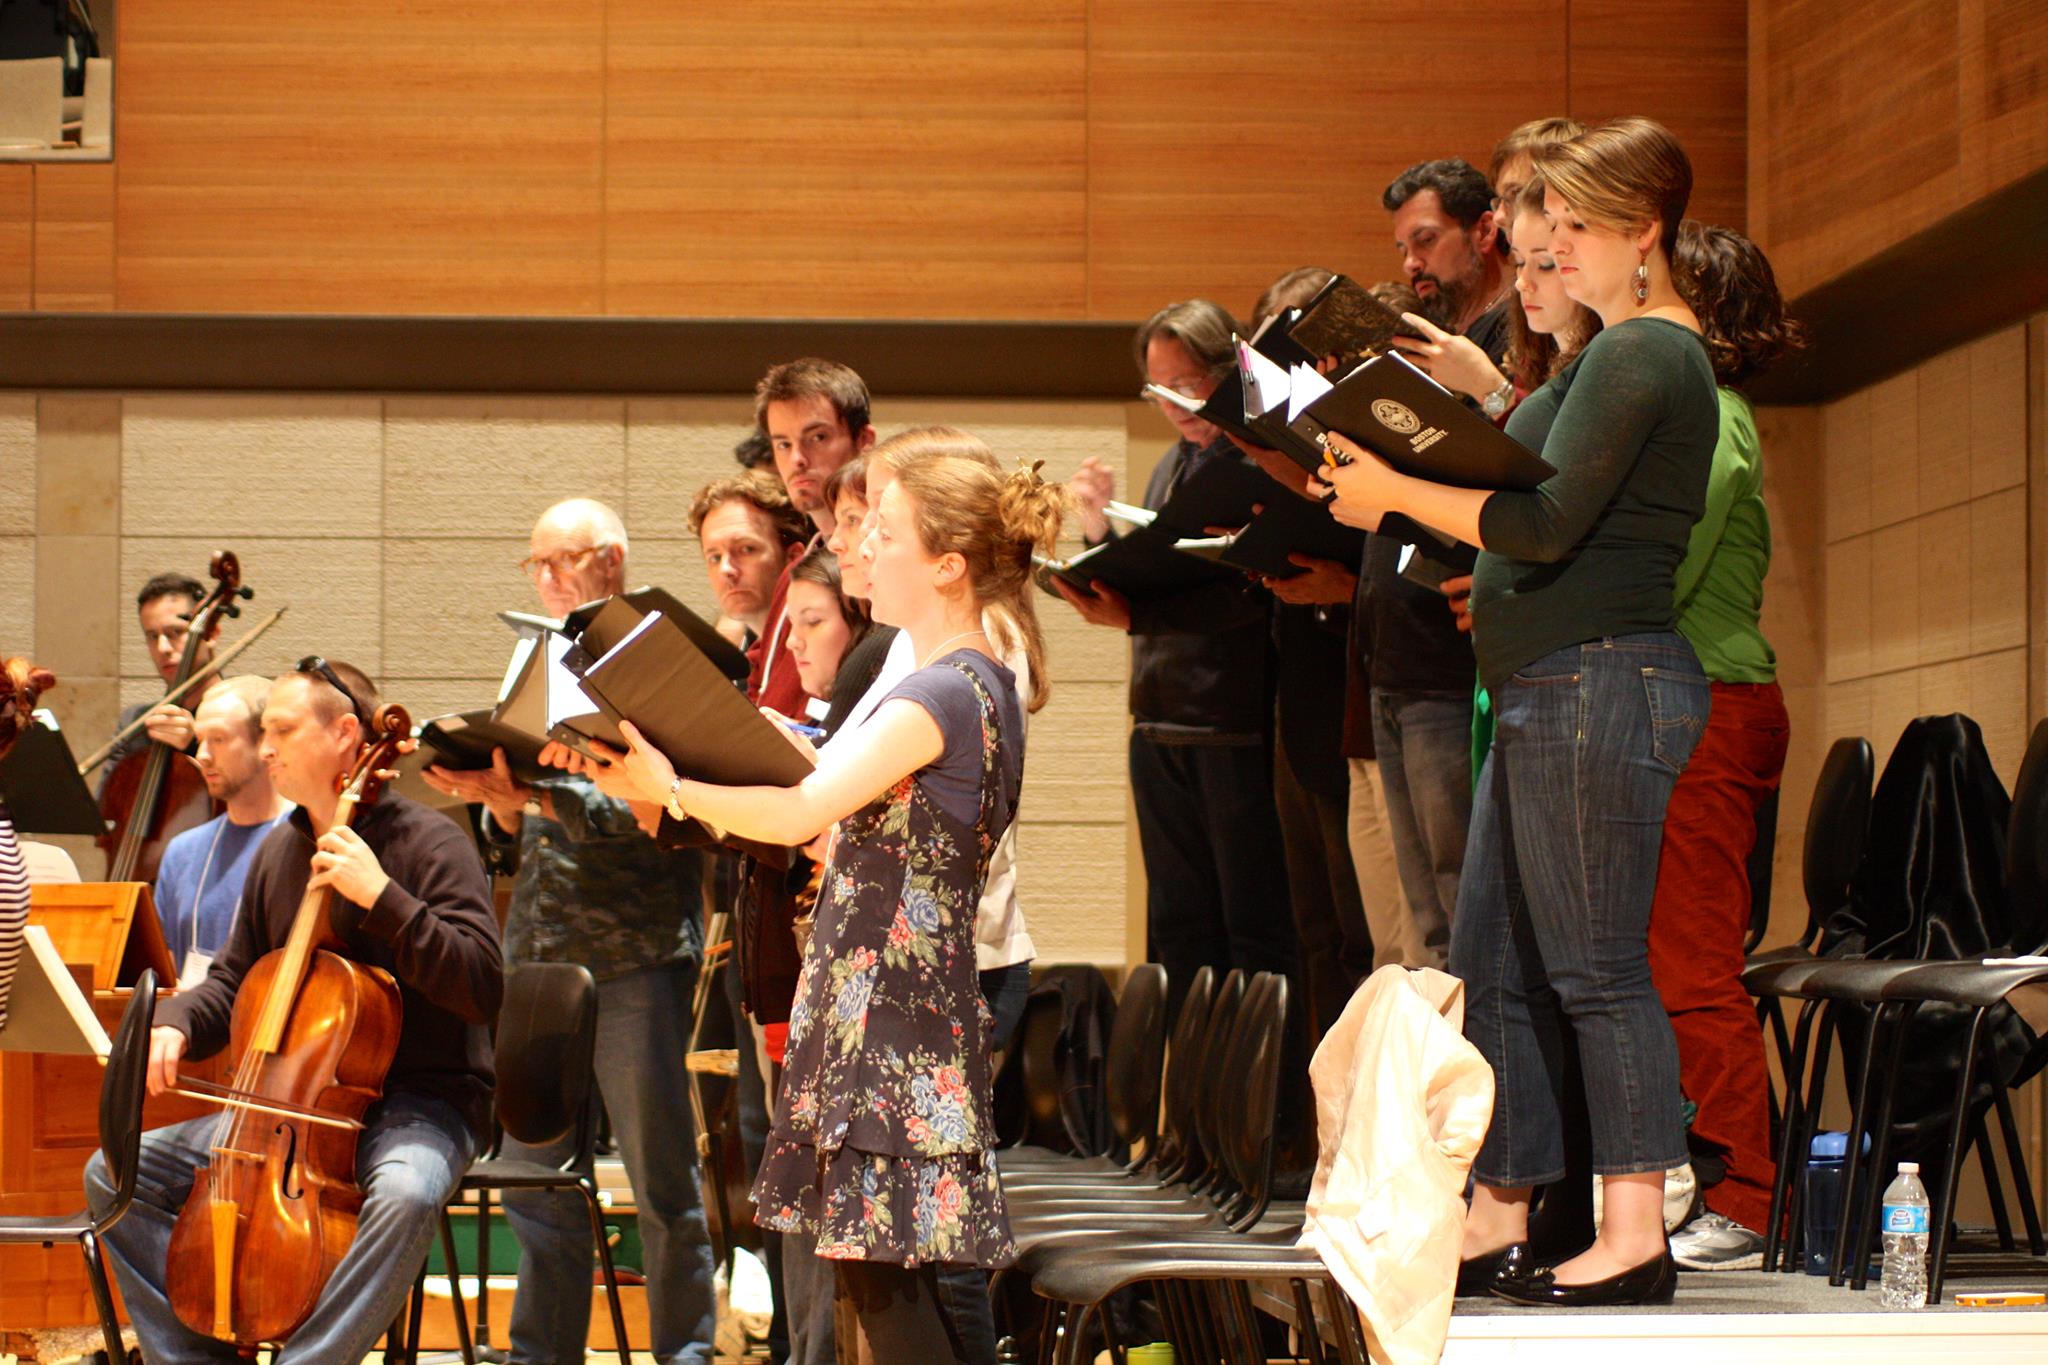  Biber Salzburg Mass dress rehearsal with American Bach Soloists, July 2013, North American premiere. 